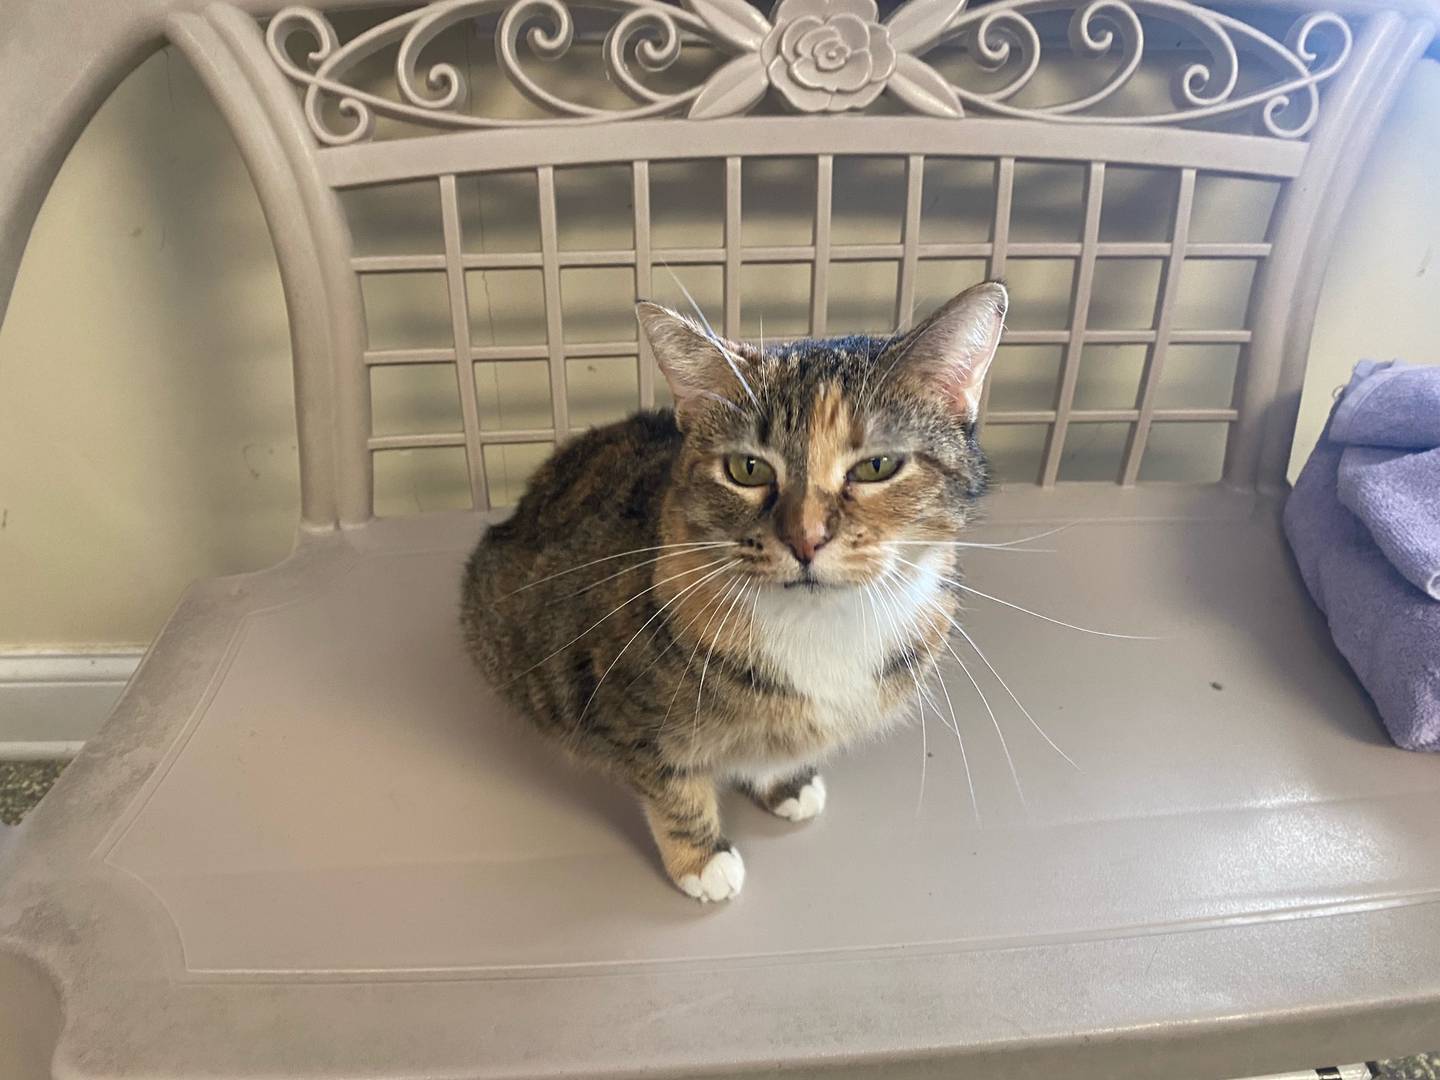 Hazel is a 3-year-old calico female. She is affectionate and loving. She enjoys time alone and is not a fan of other cats. Hazel loves snuggling and being pet.  She would make a great addition to any family. For additional information on Hazel, including adoption fees please visit https://justanimals.org/ or call 815-448-2510.